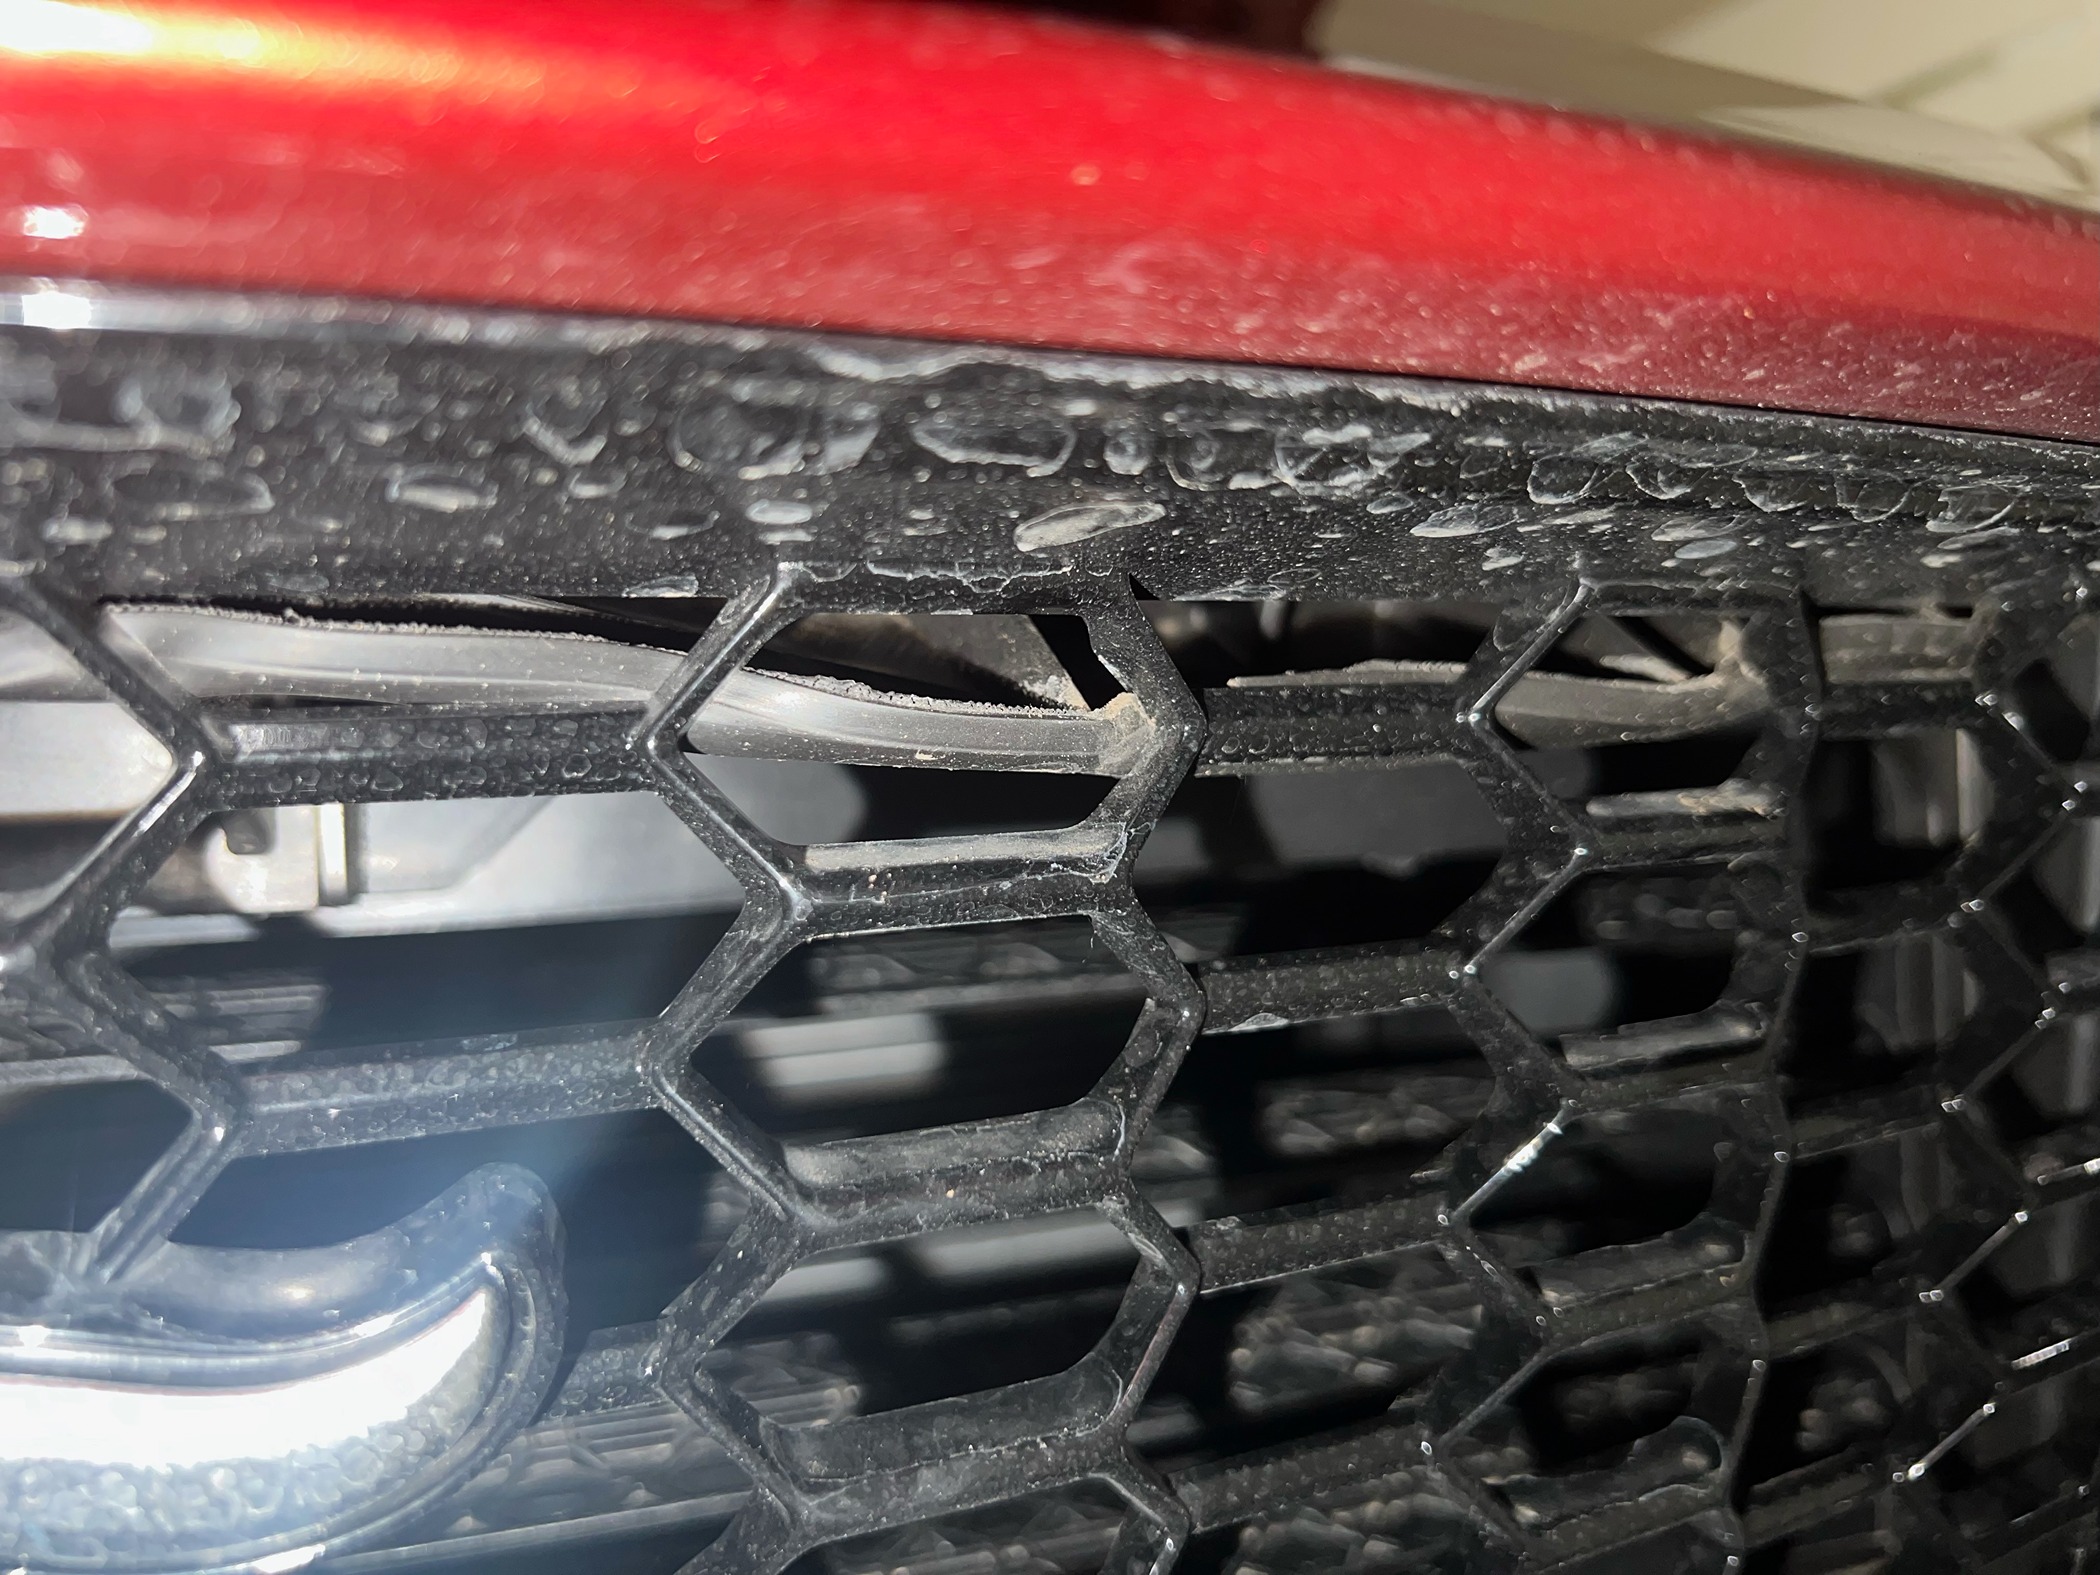 S650 Mustang Rubber piece hanging down behind grille image0 (2)